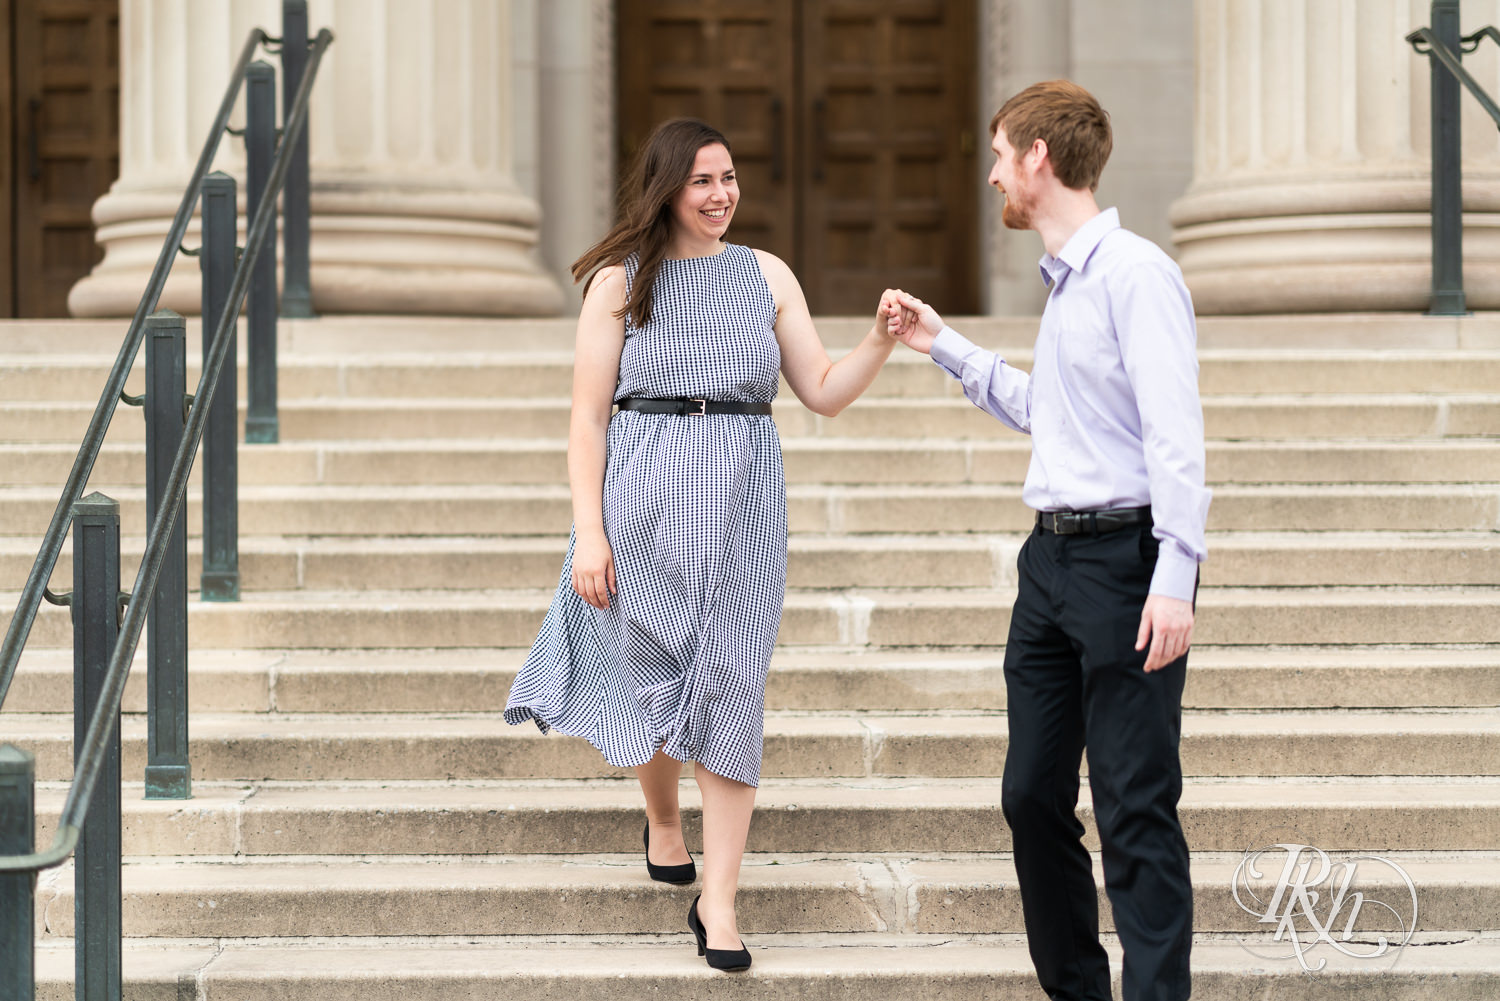 Man and woman walking down stairs during engagement session at University of Minnesota.